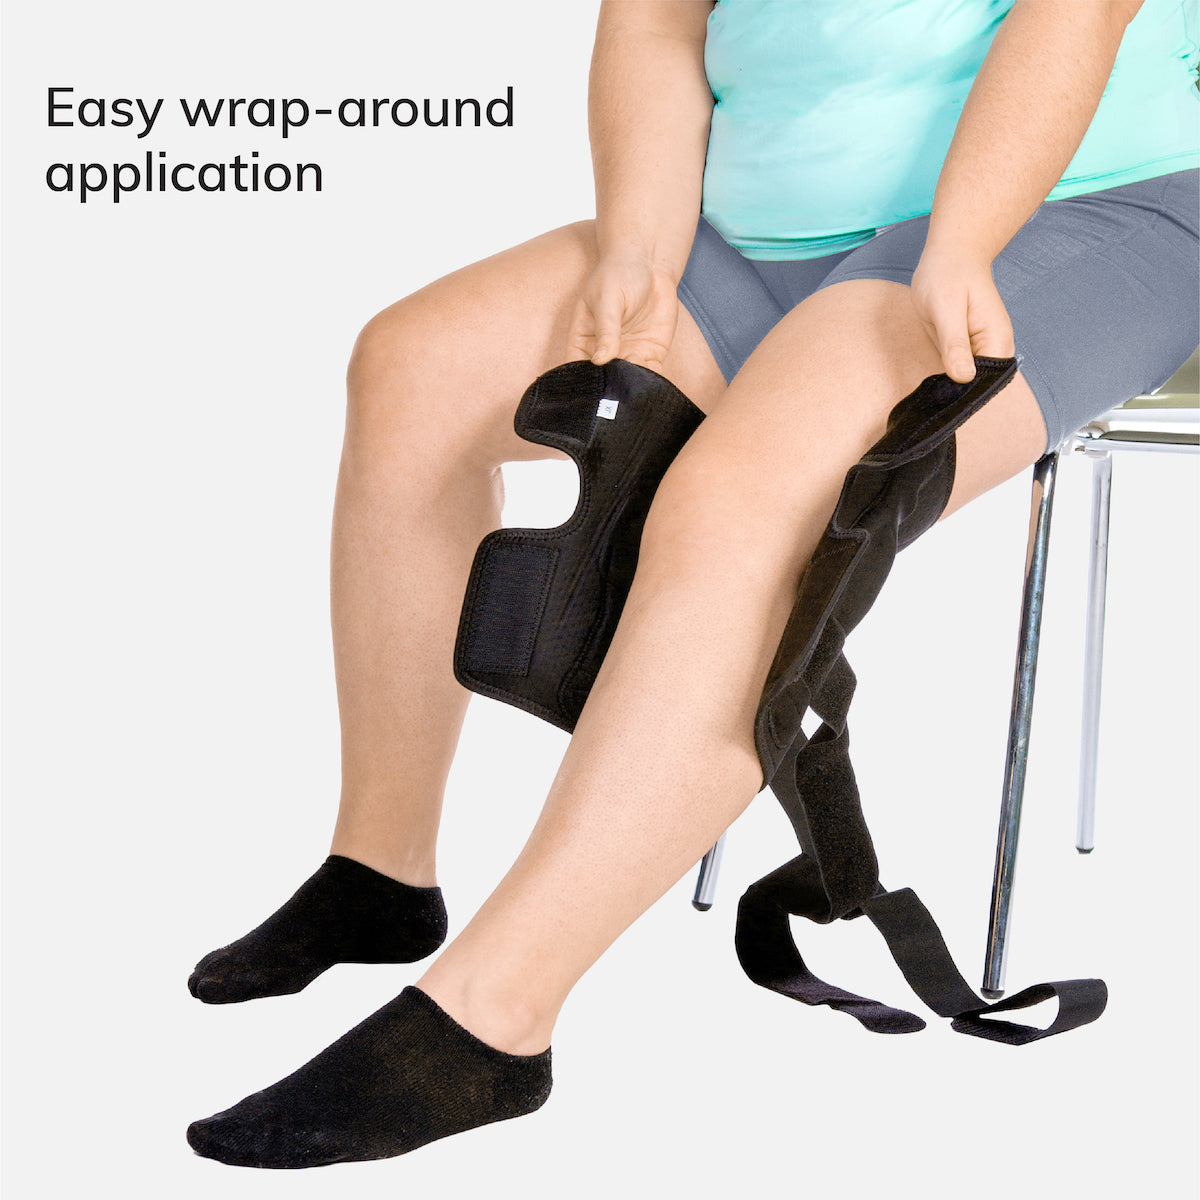 to put on the torn meniscus knee brace slide it onto your kneecap and tighten straps